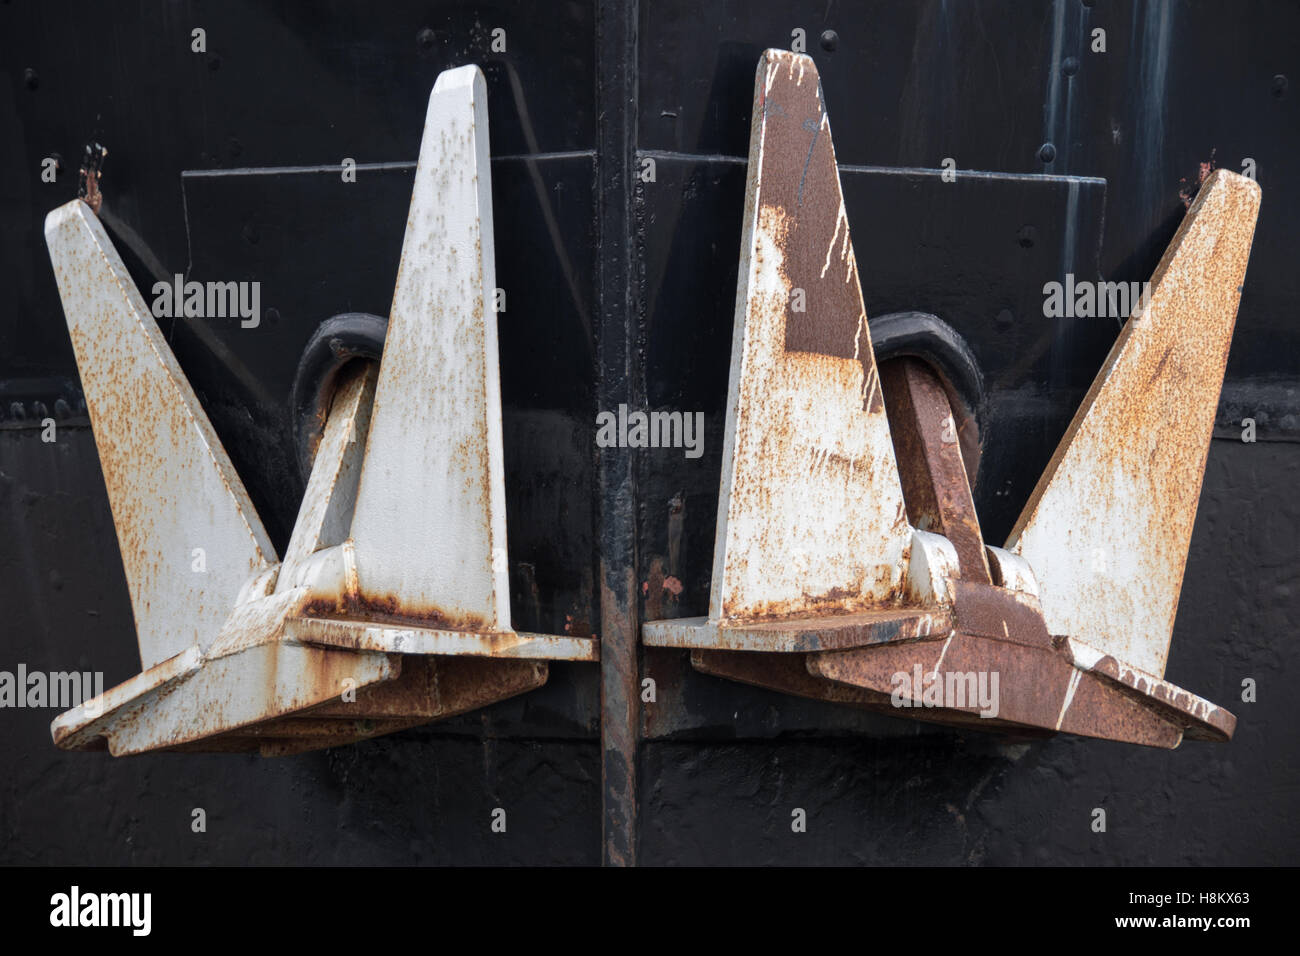 Amsterdam, Netherlands close up of the anchors of a boat docked in the harbor. Stock Photo